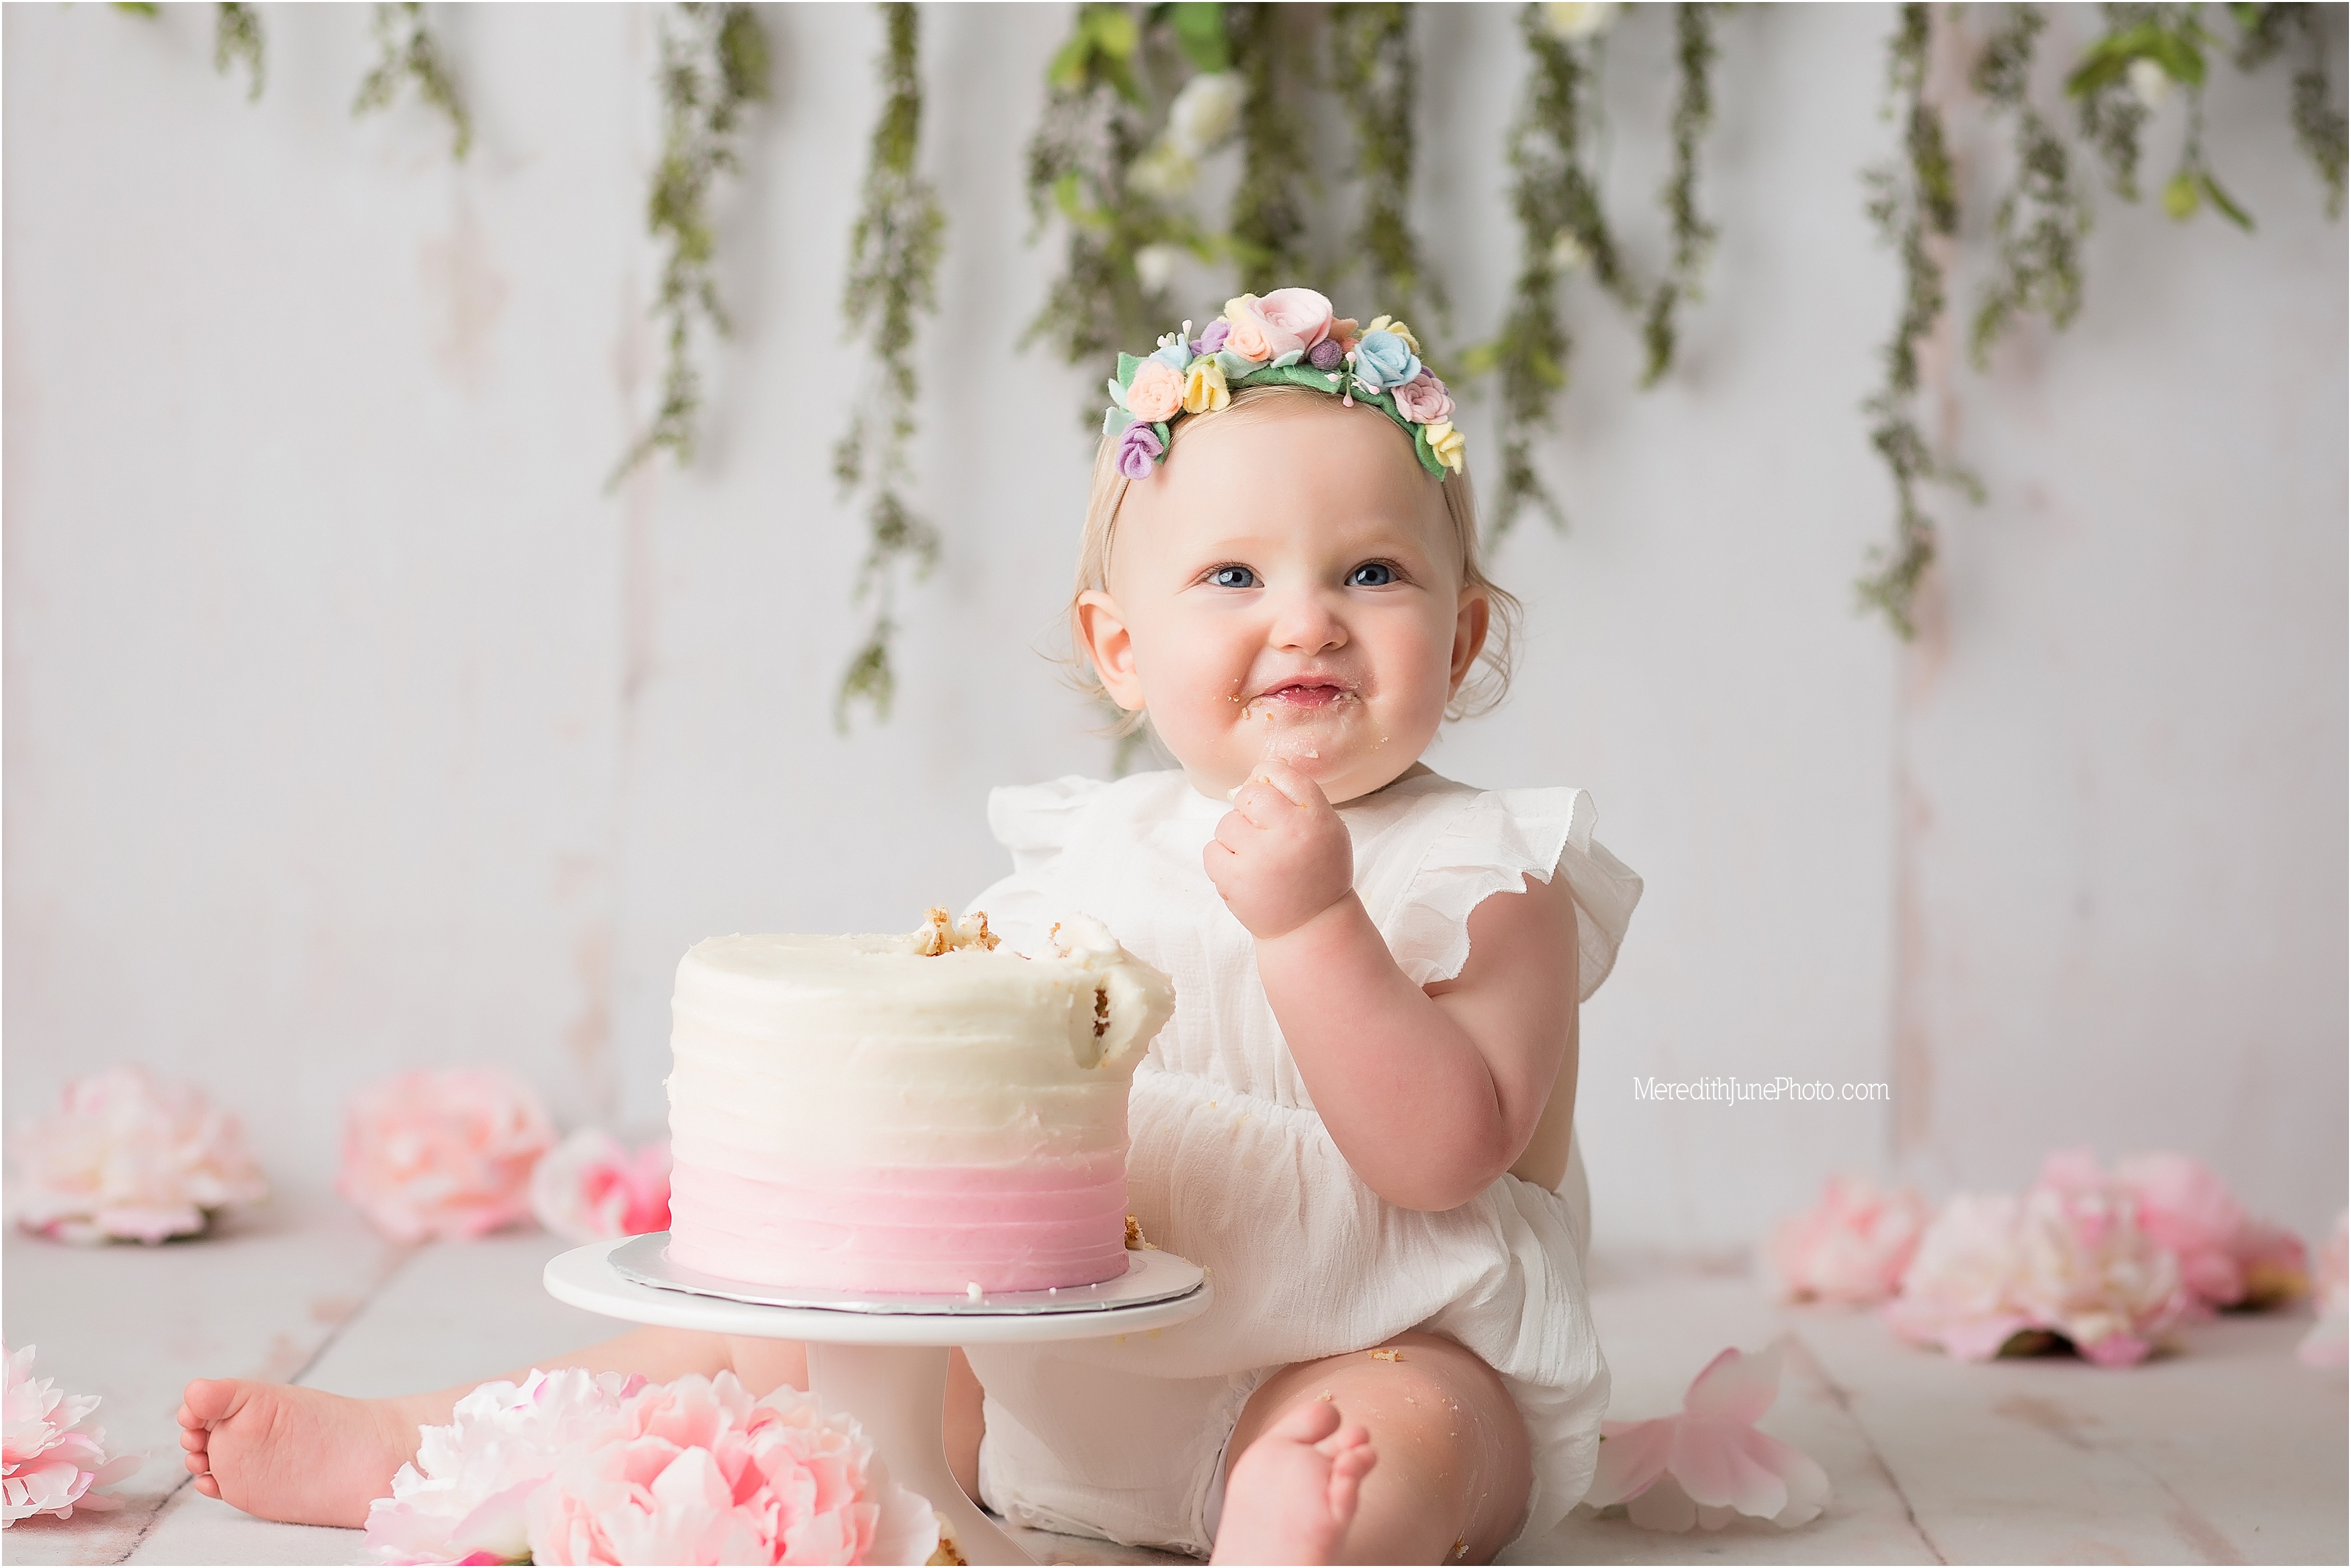 Murphy Jane's adorable one year session